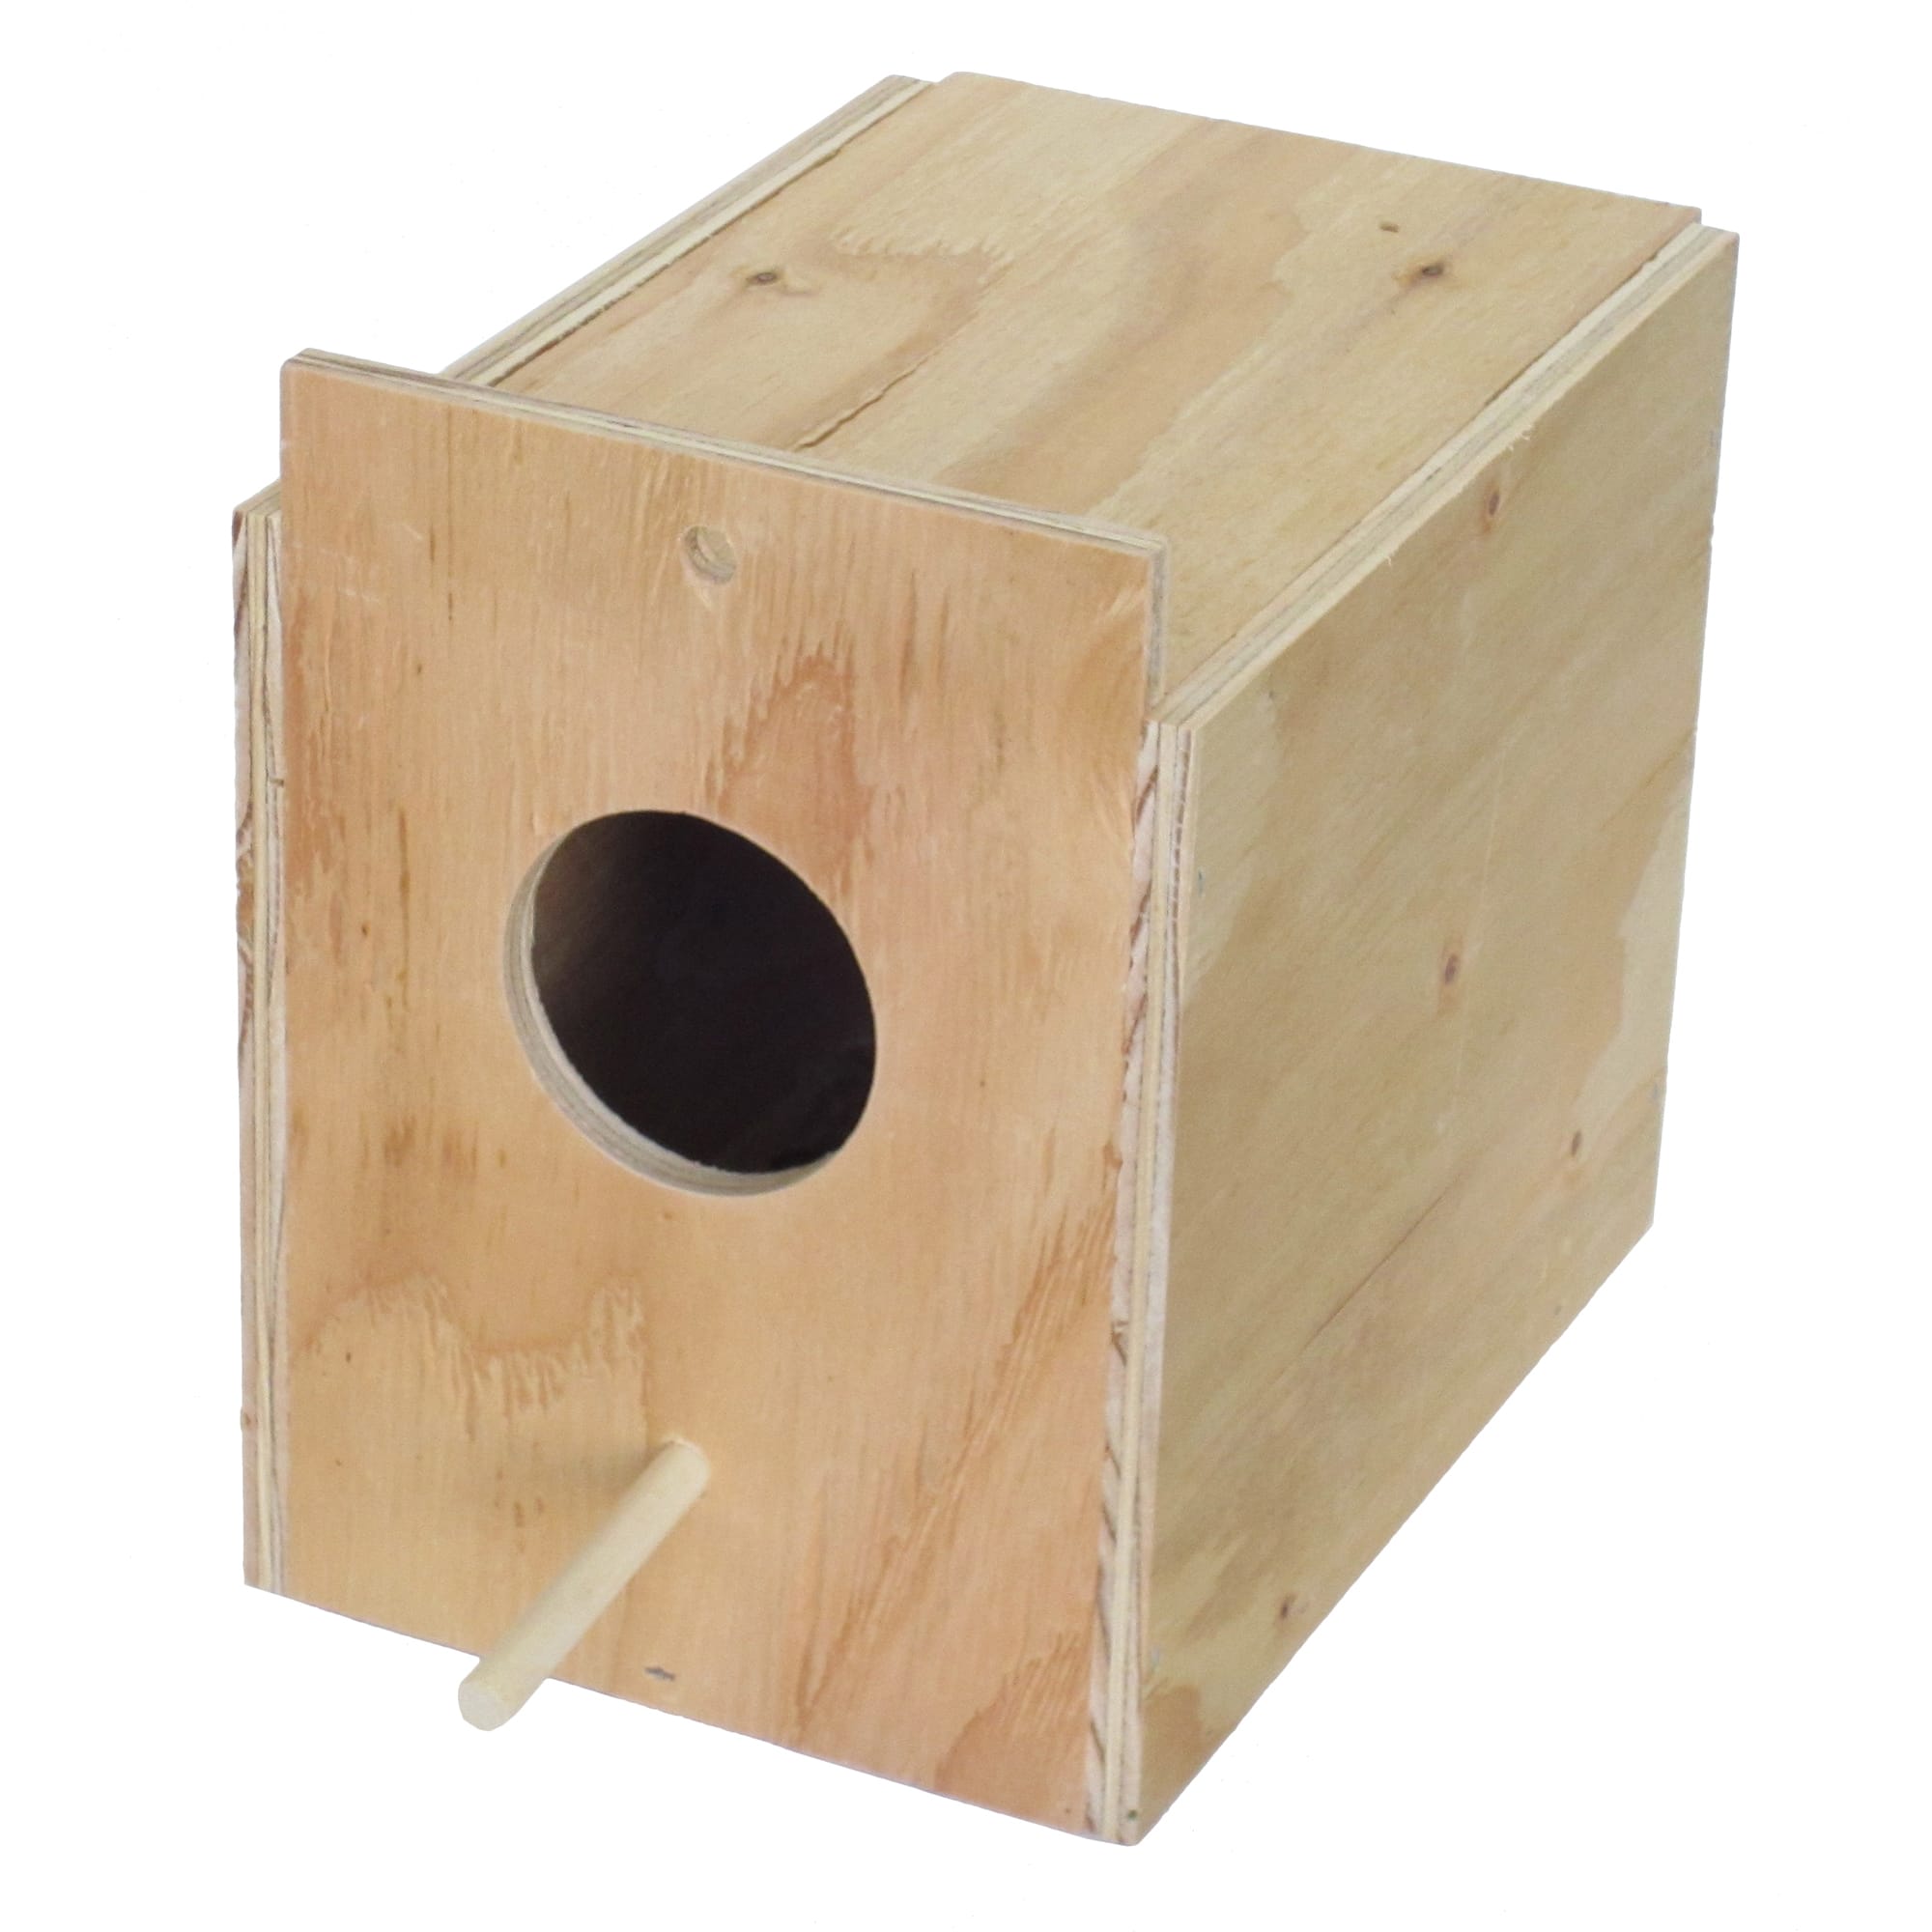 Woodpeckers Wooden Nesting Boxes with Hinged Lids, Set of 3 Unfinished Wood  Decorative Boxes for Gifts and Crafts